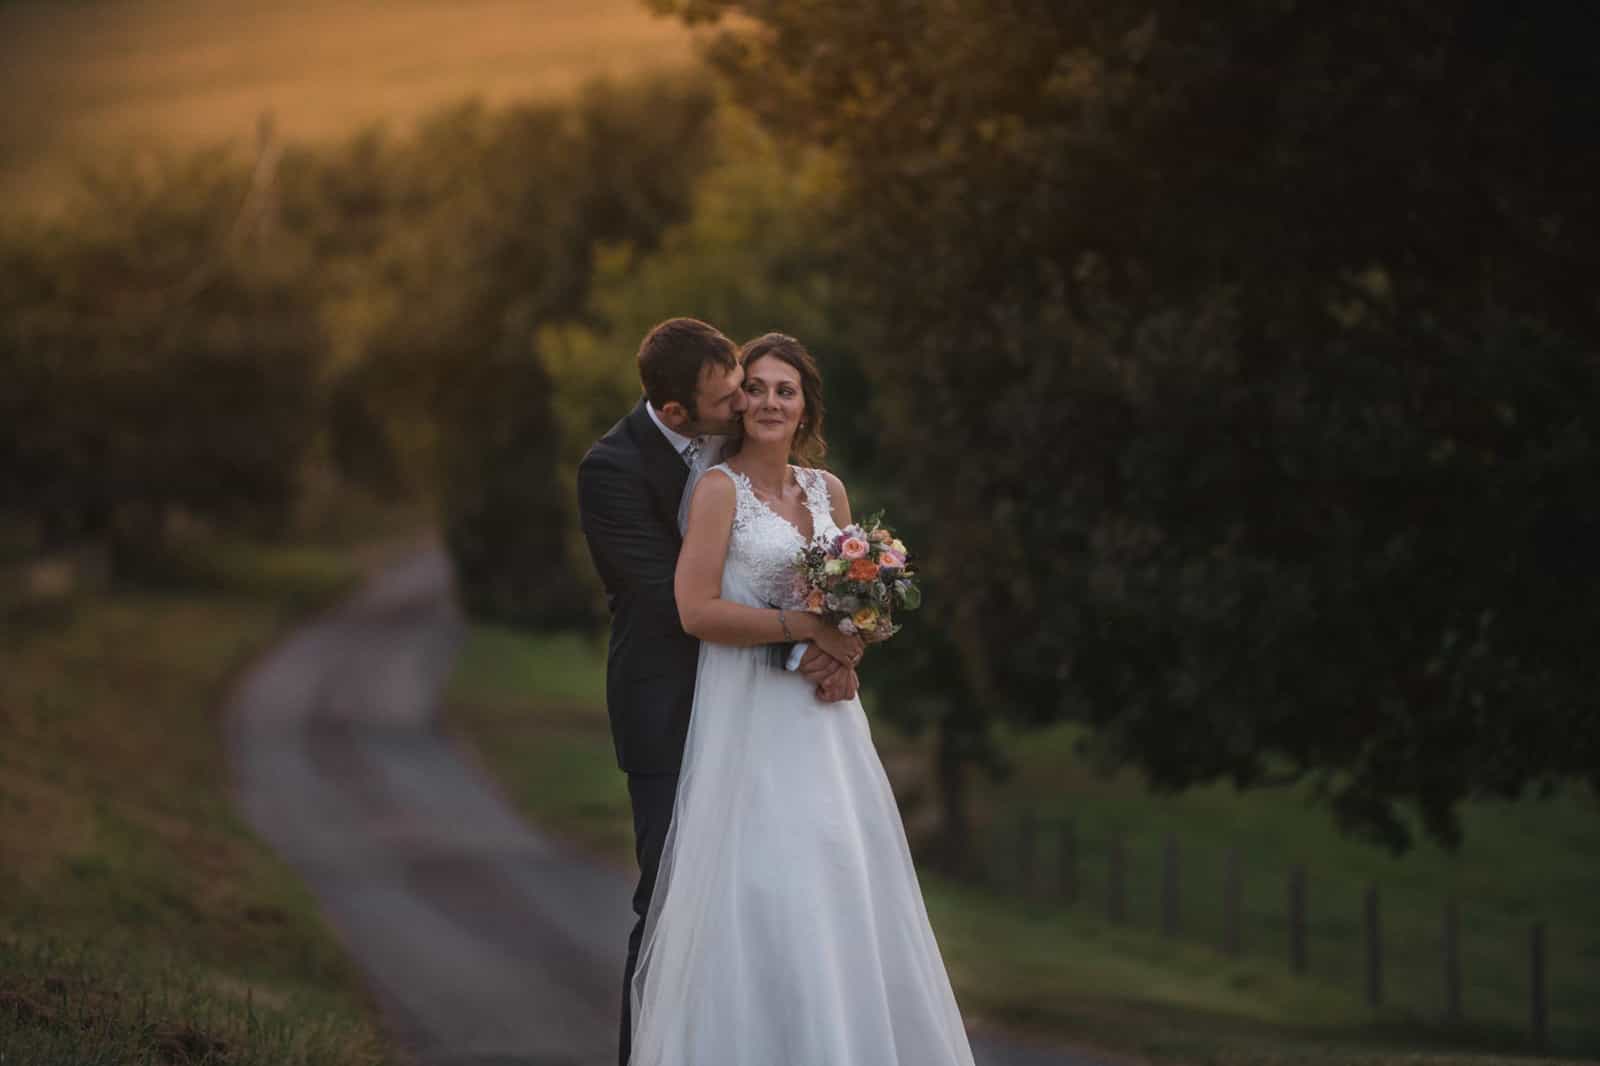 Intimate Weddings at Pauntley Court